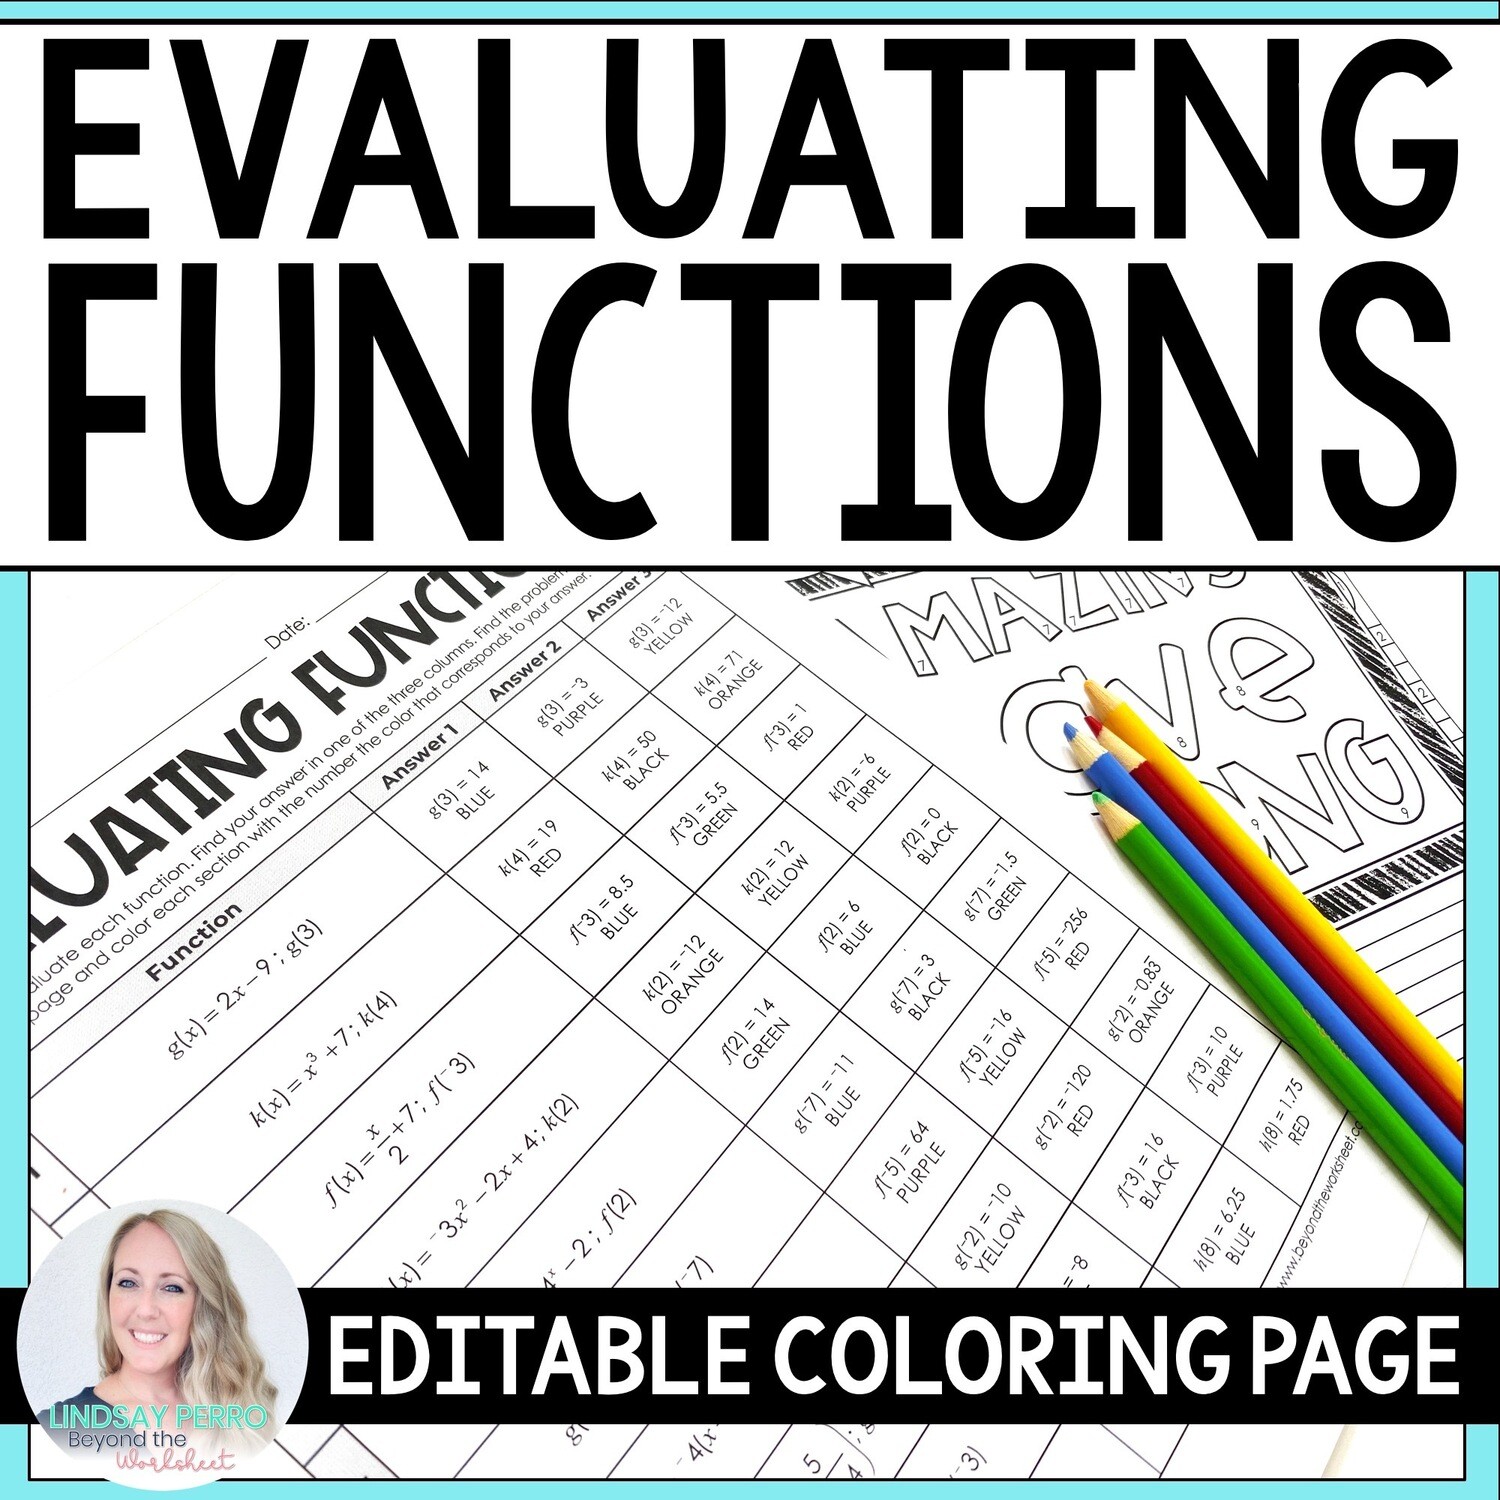 Evaluating Functions Editable Coloring Page Intended For Evaluating Functions Worksheet Algebra 1